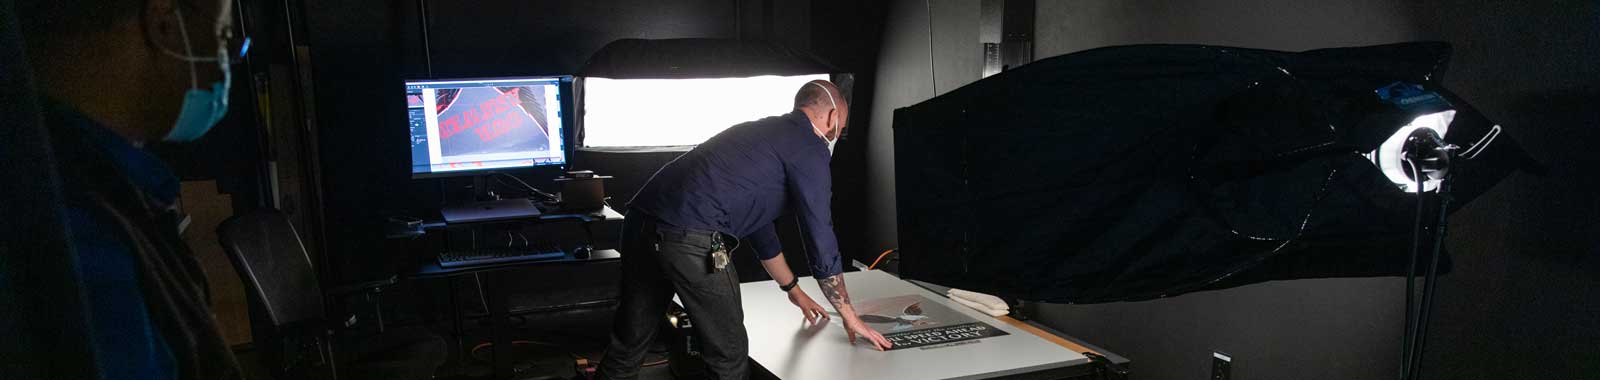 Man in digitization lab imaging a poster on a table